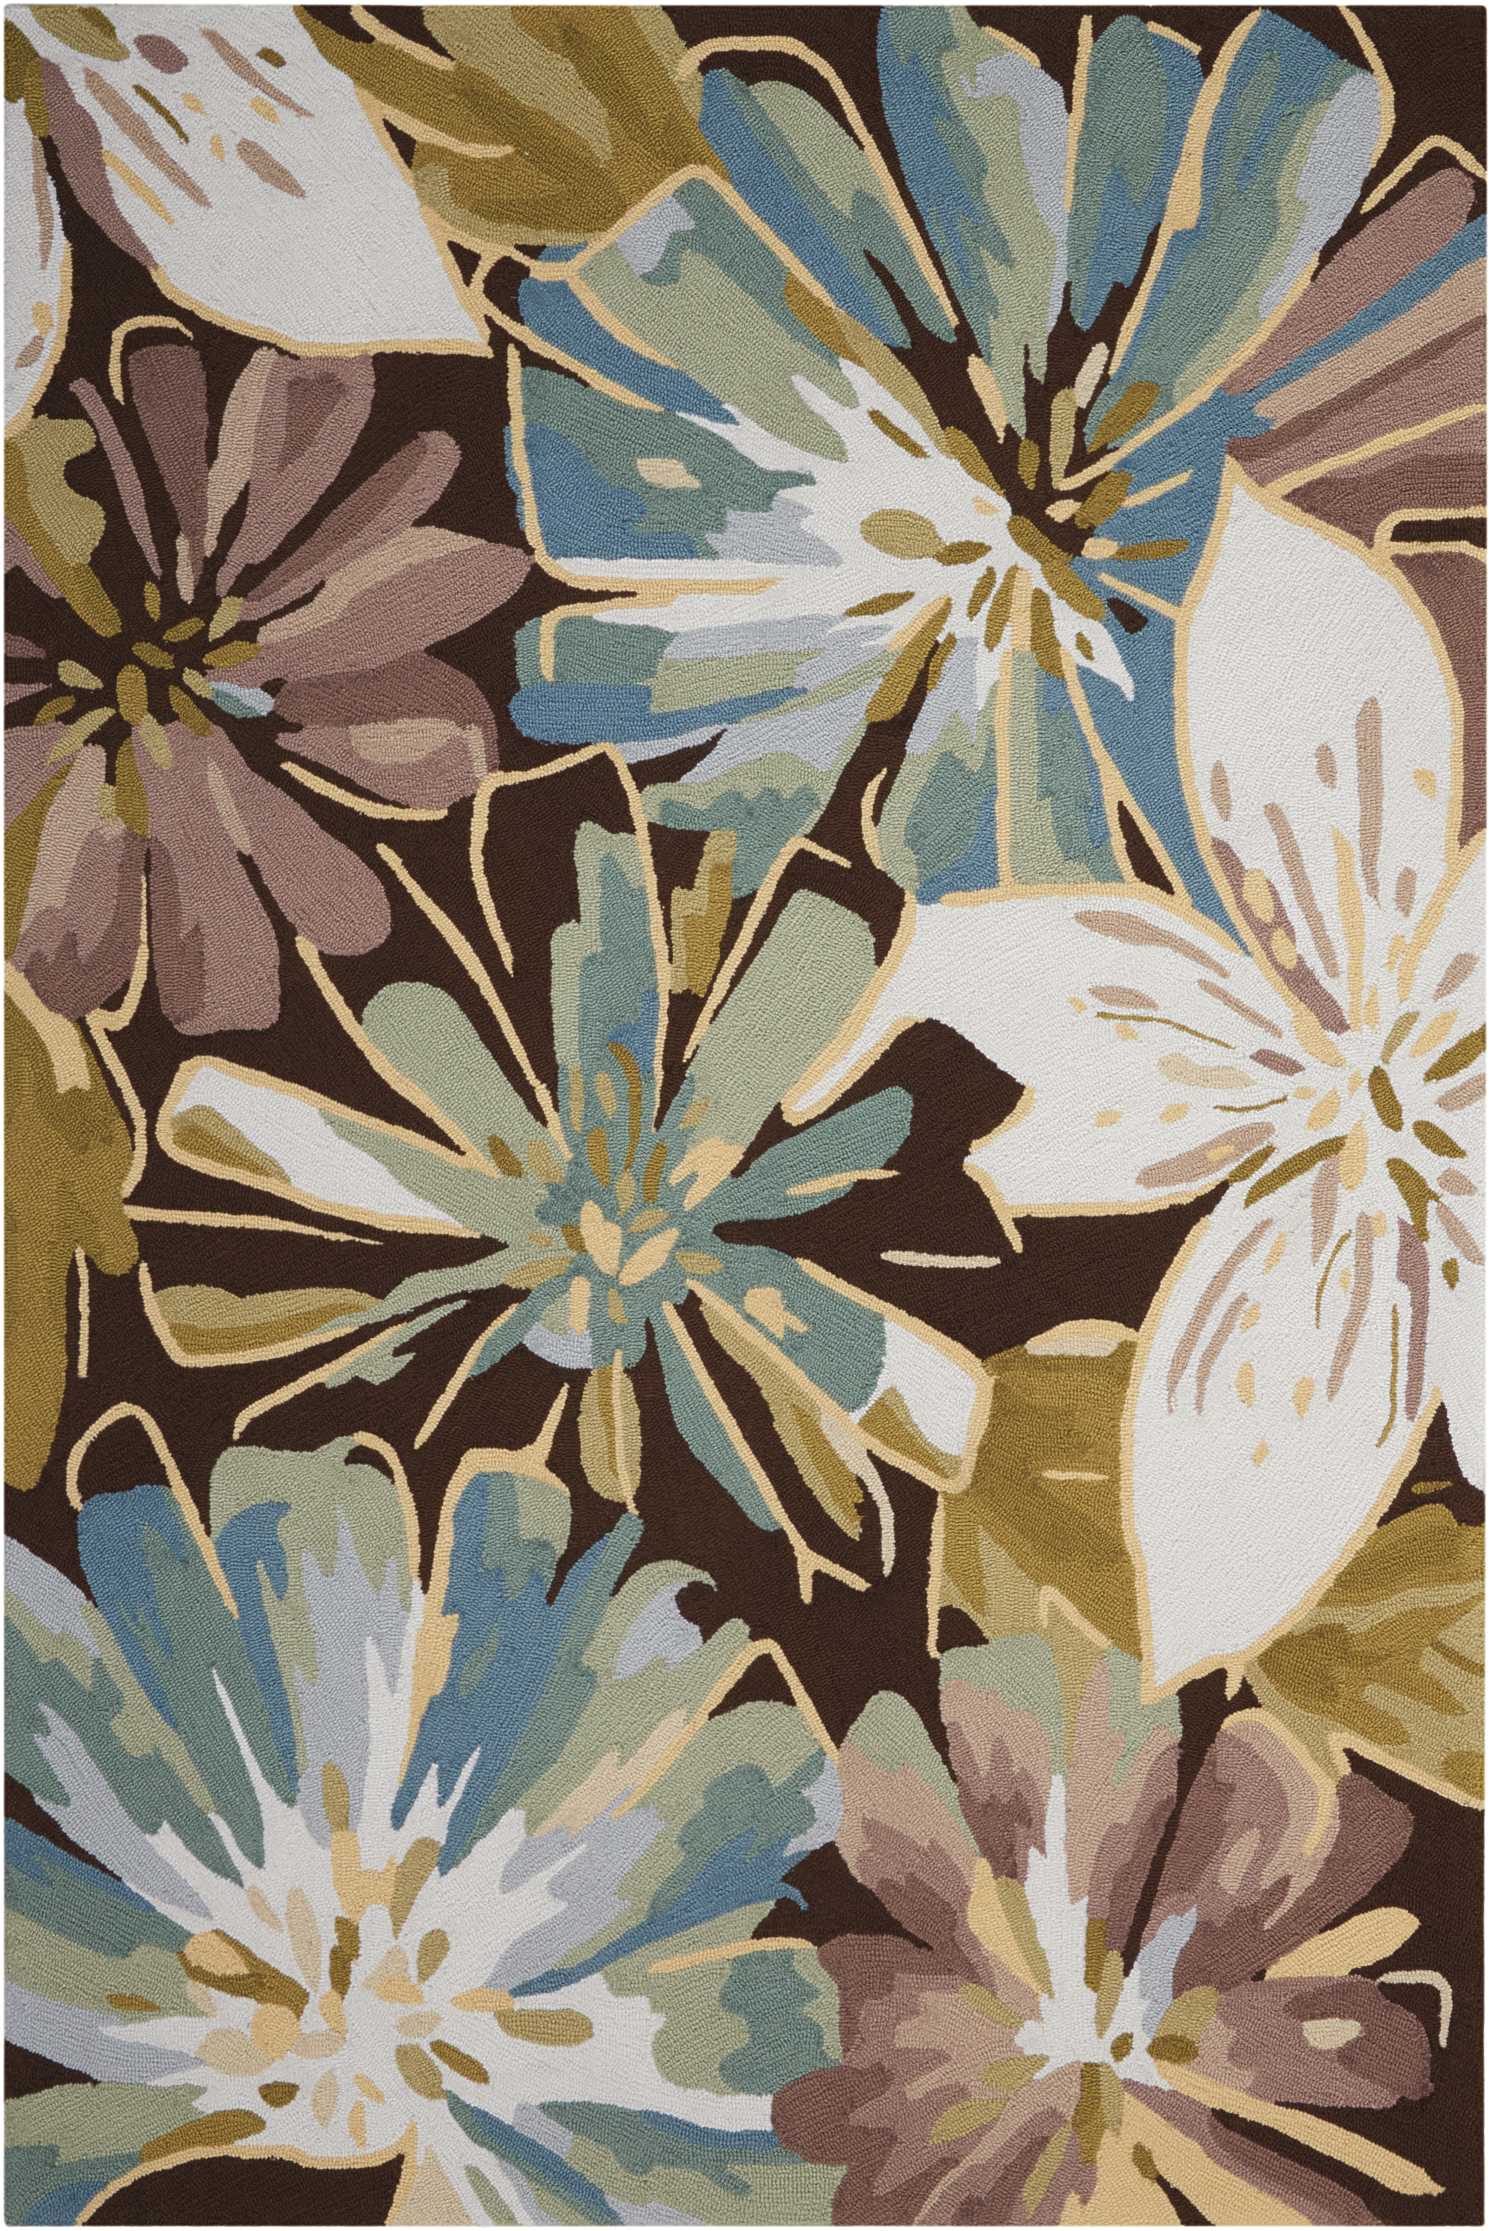 Nourison Fantasy Floral Chocolate 5' x 7'6" Area Rug, (5x8) - image 2 of 5